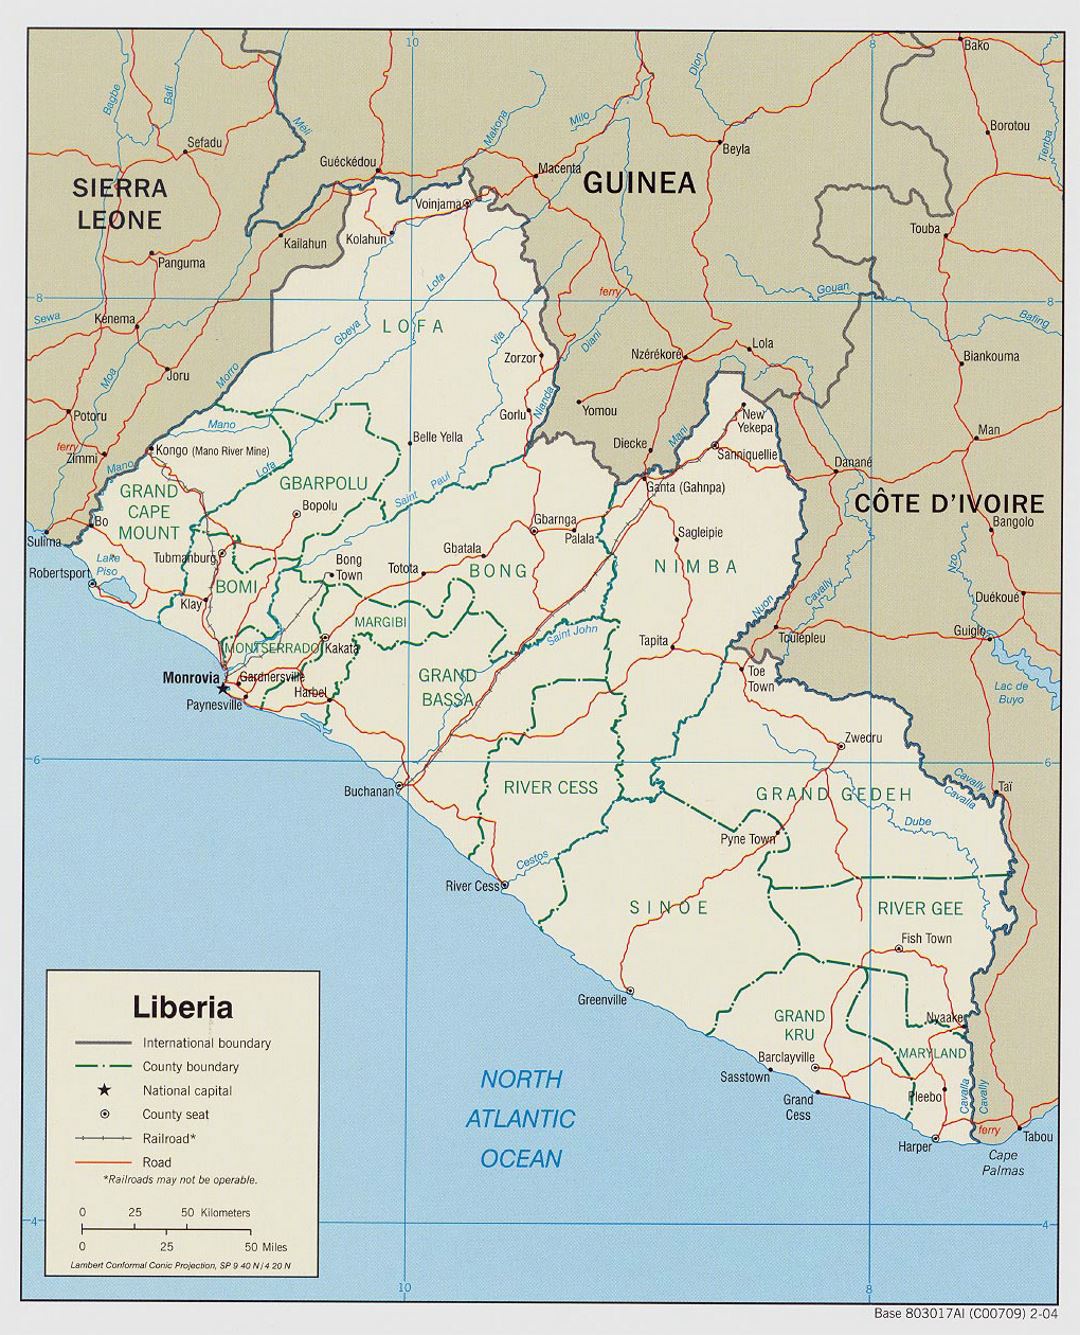 Detailed political and administrative map of Liberia with roads, railroads and major cities - 2004